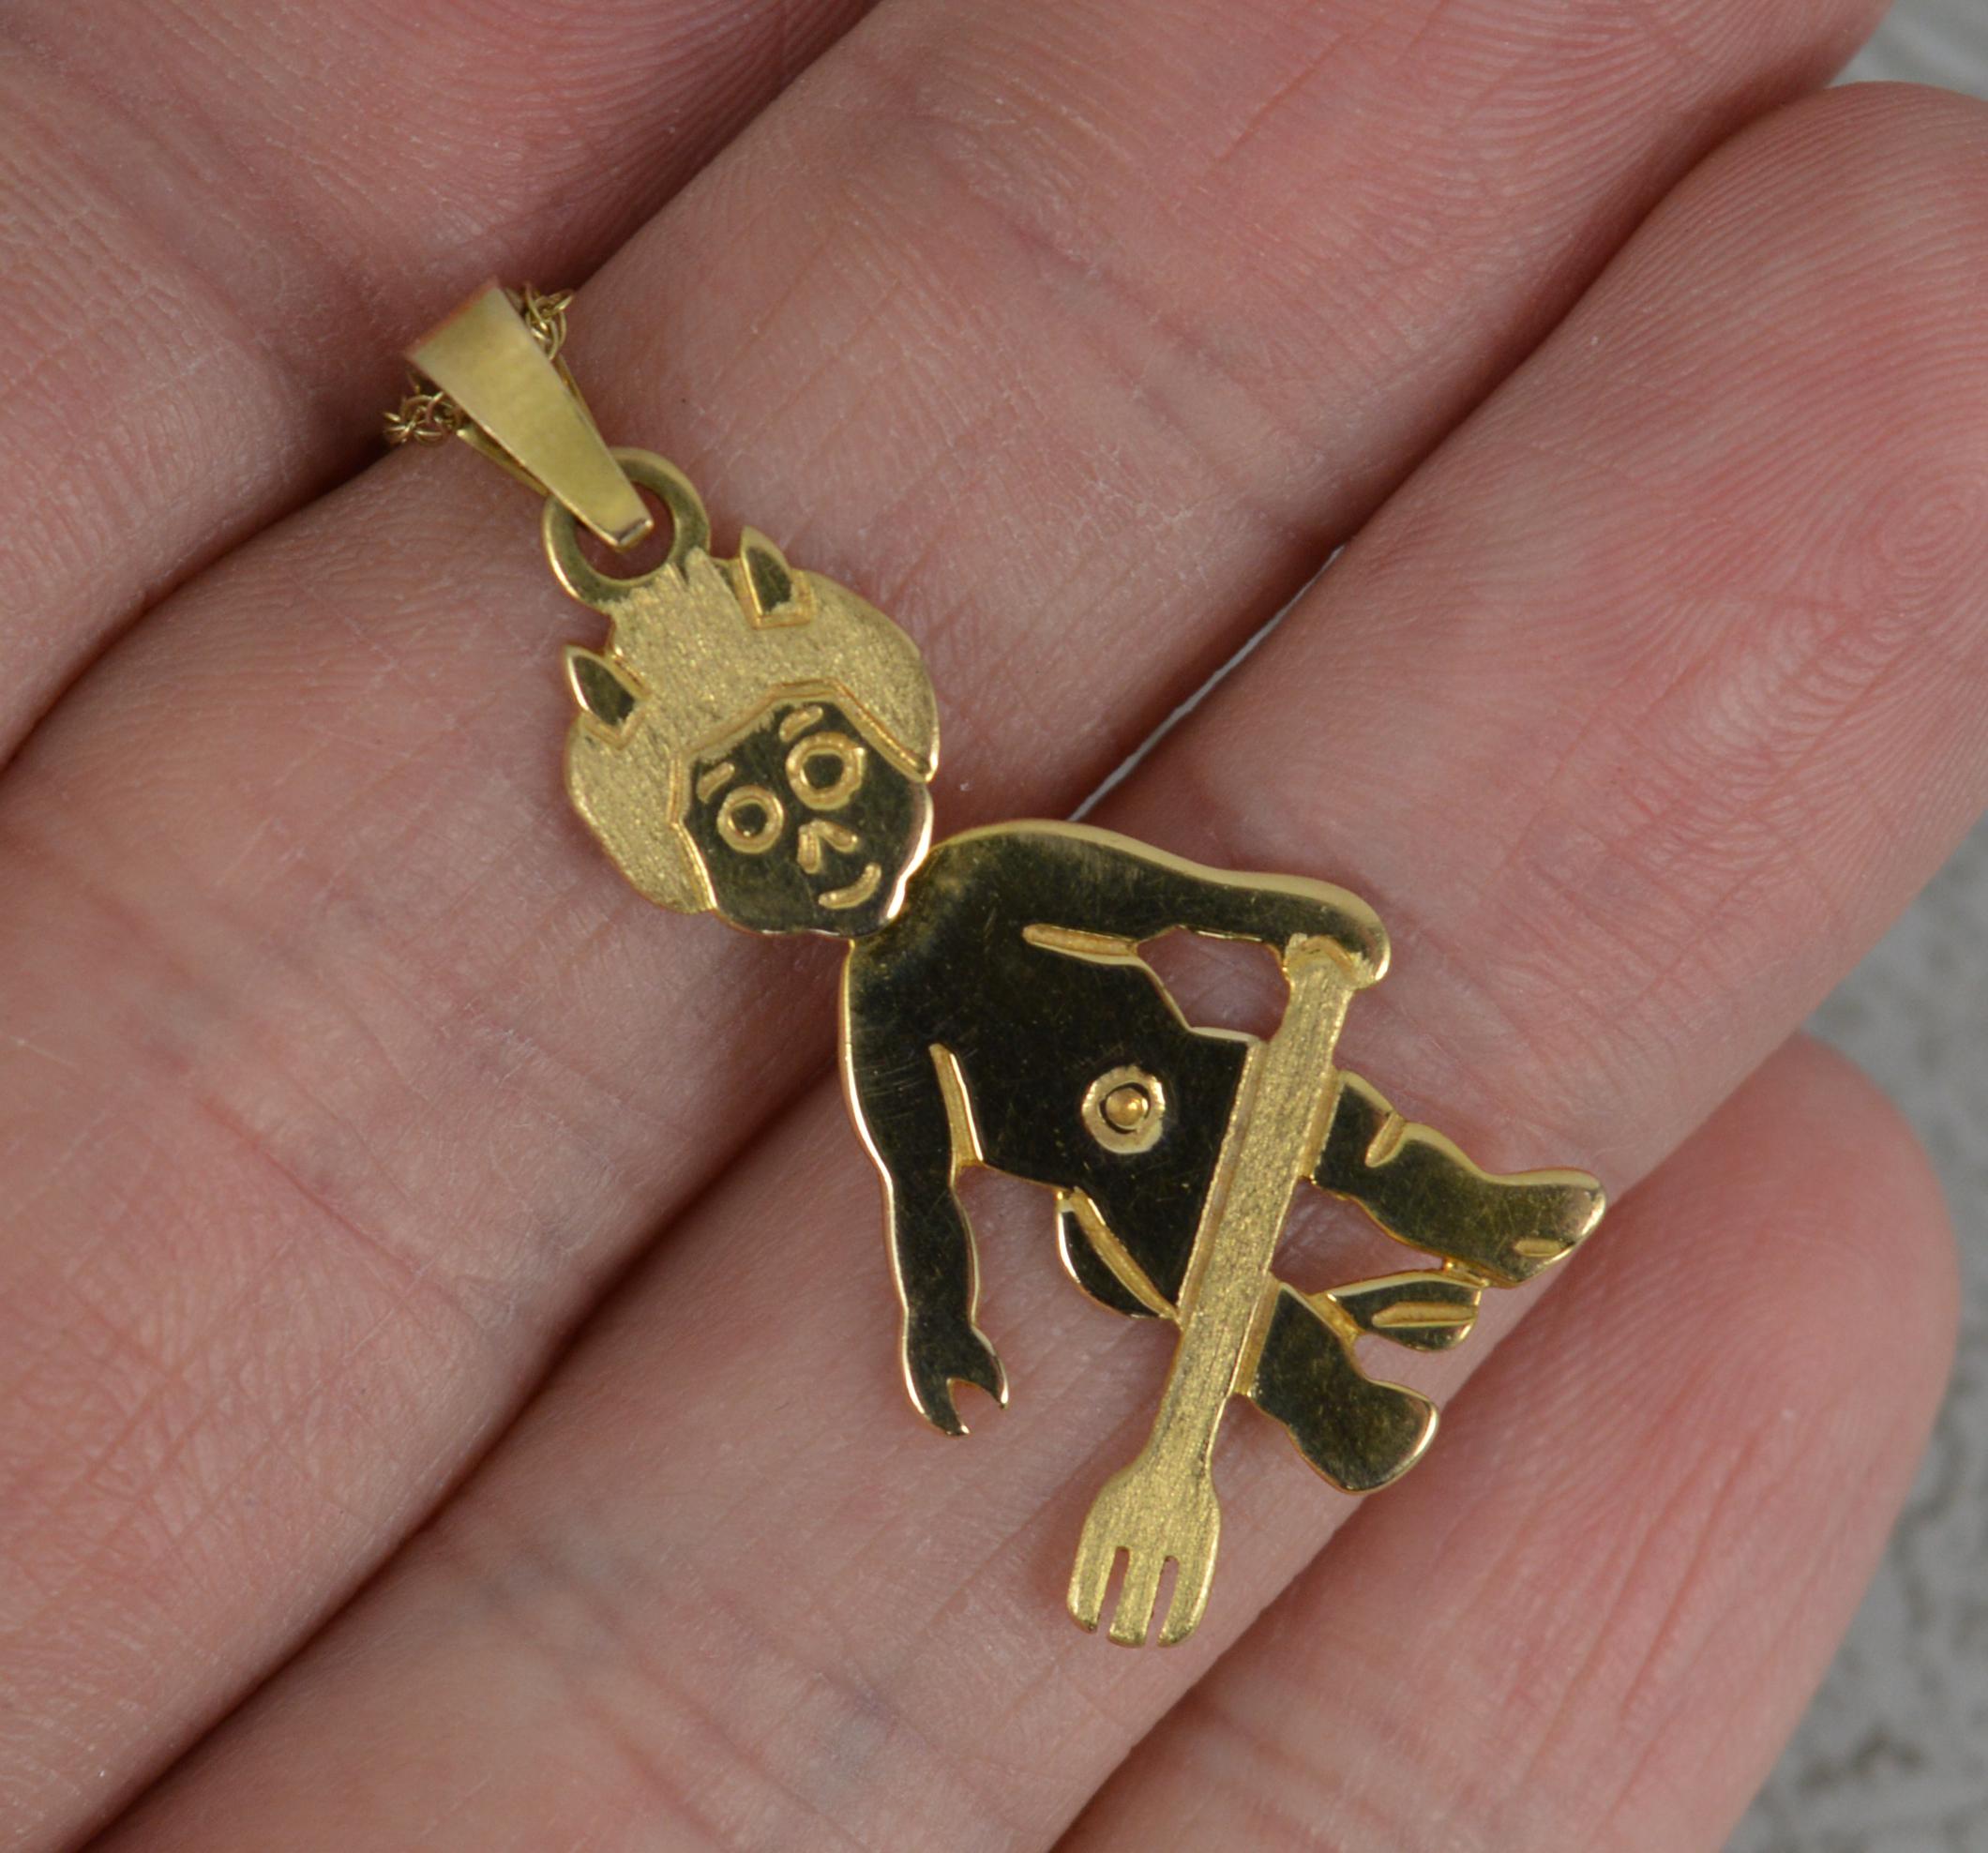 A beautiful vintage charm.
Solid 9 carat yellow gold example.
Shaped as a naughty little devil with an articulated or swivel head.
CONDITION ; Very good. Clean example. Crisp design. Please view photographs.
WEIGHT ; 2.3 grams
SIZE ; 25mm tall devil